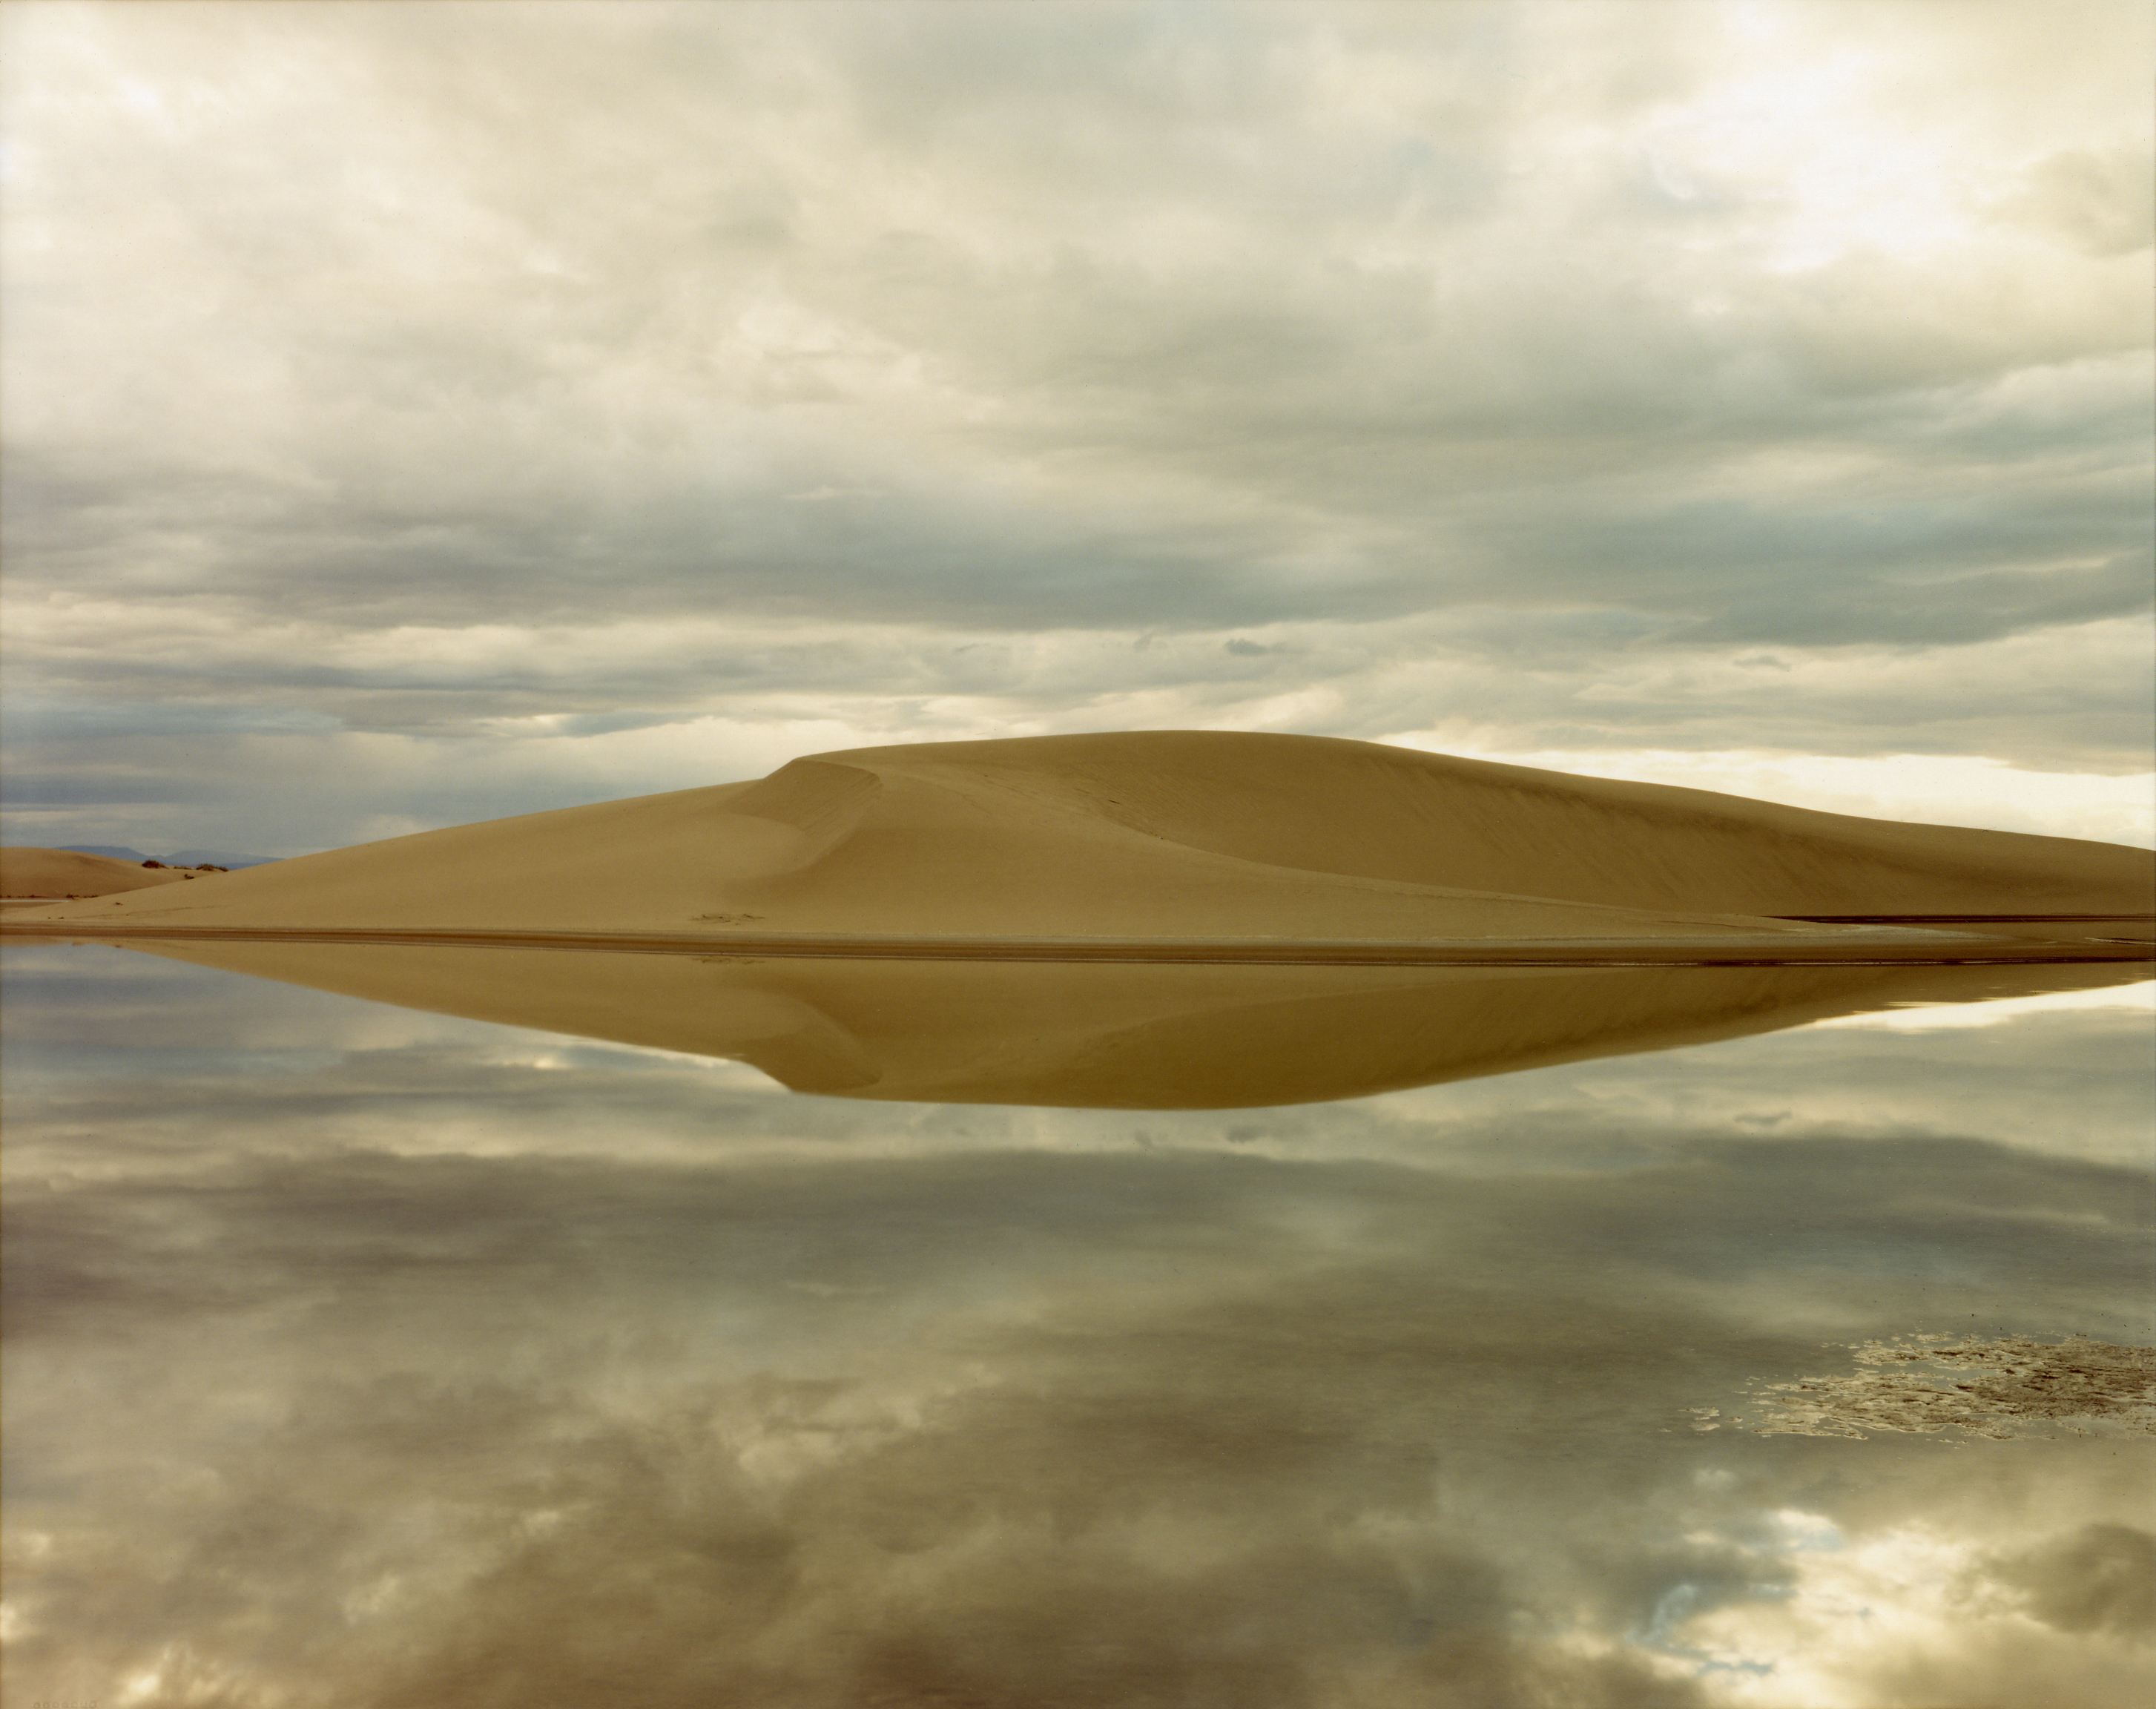 Color photograph of a large mound of sand in desert near body of water